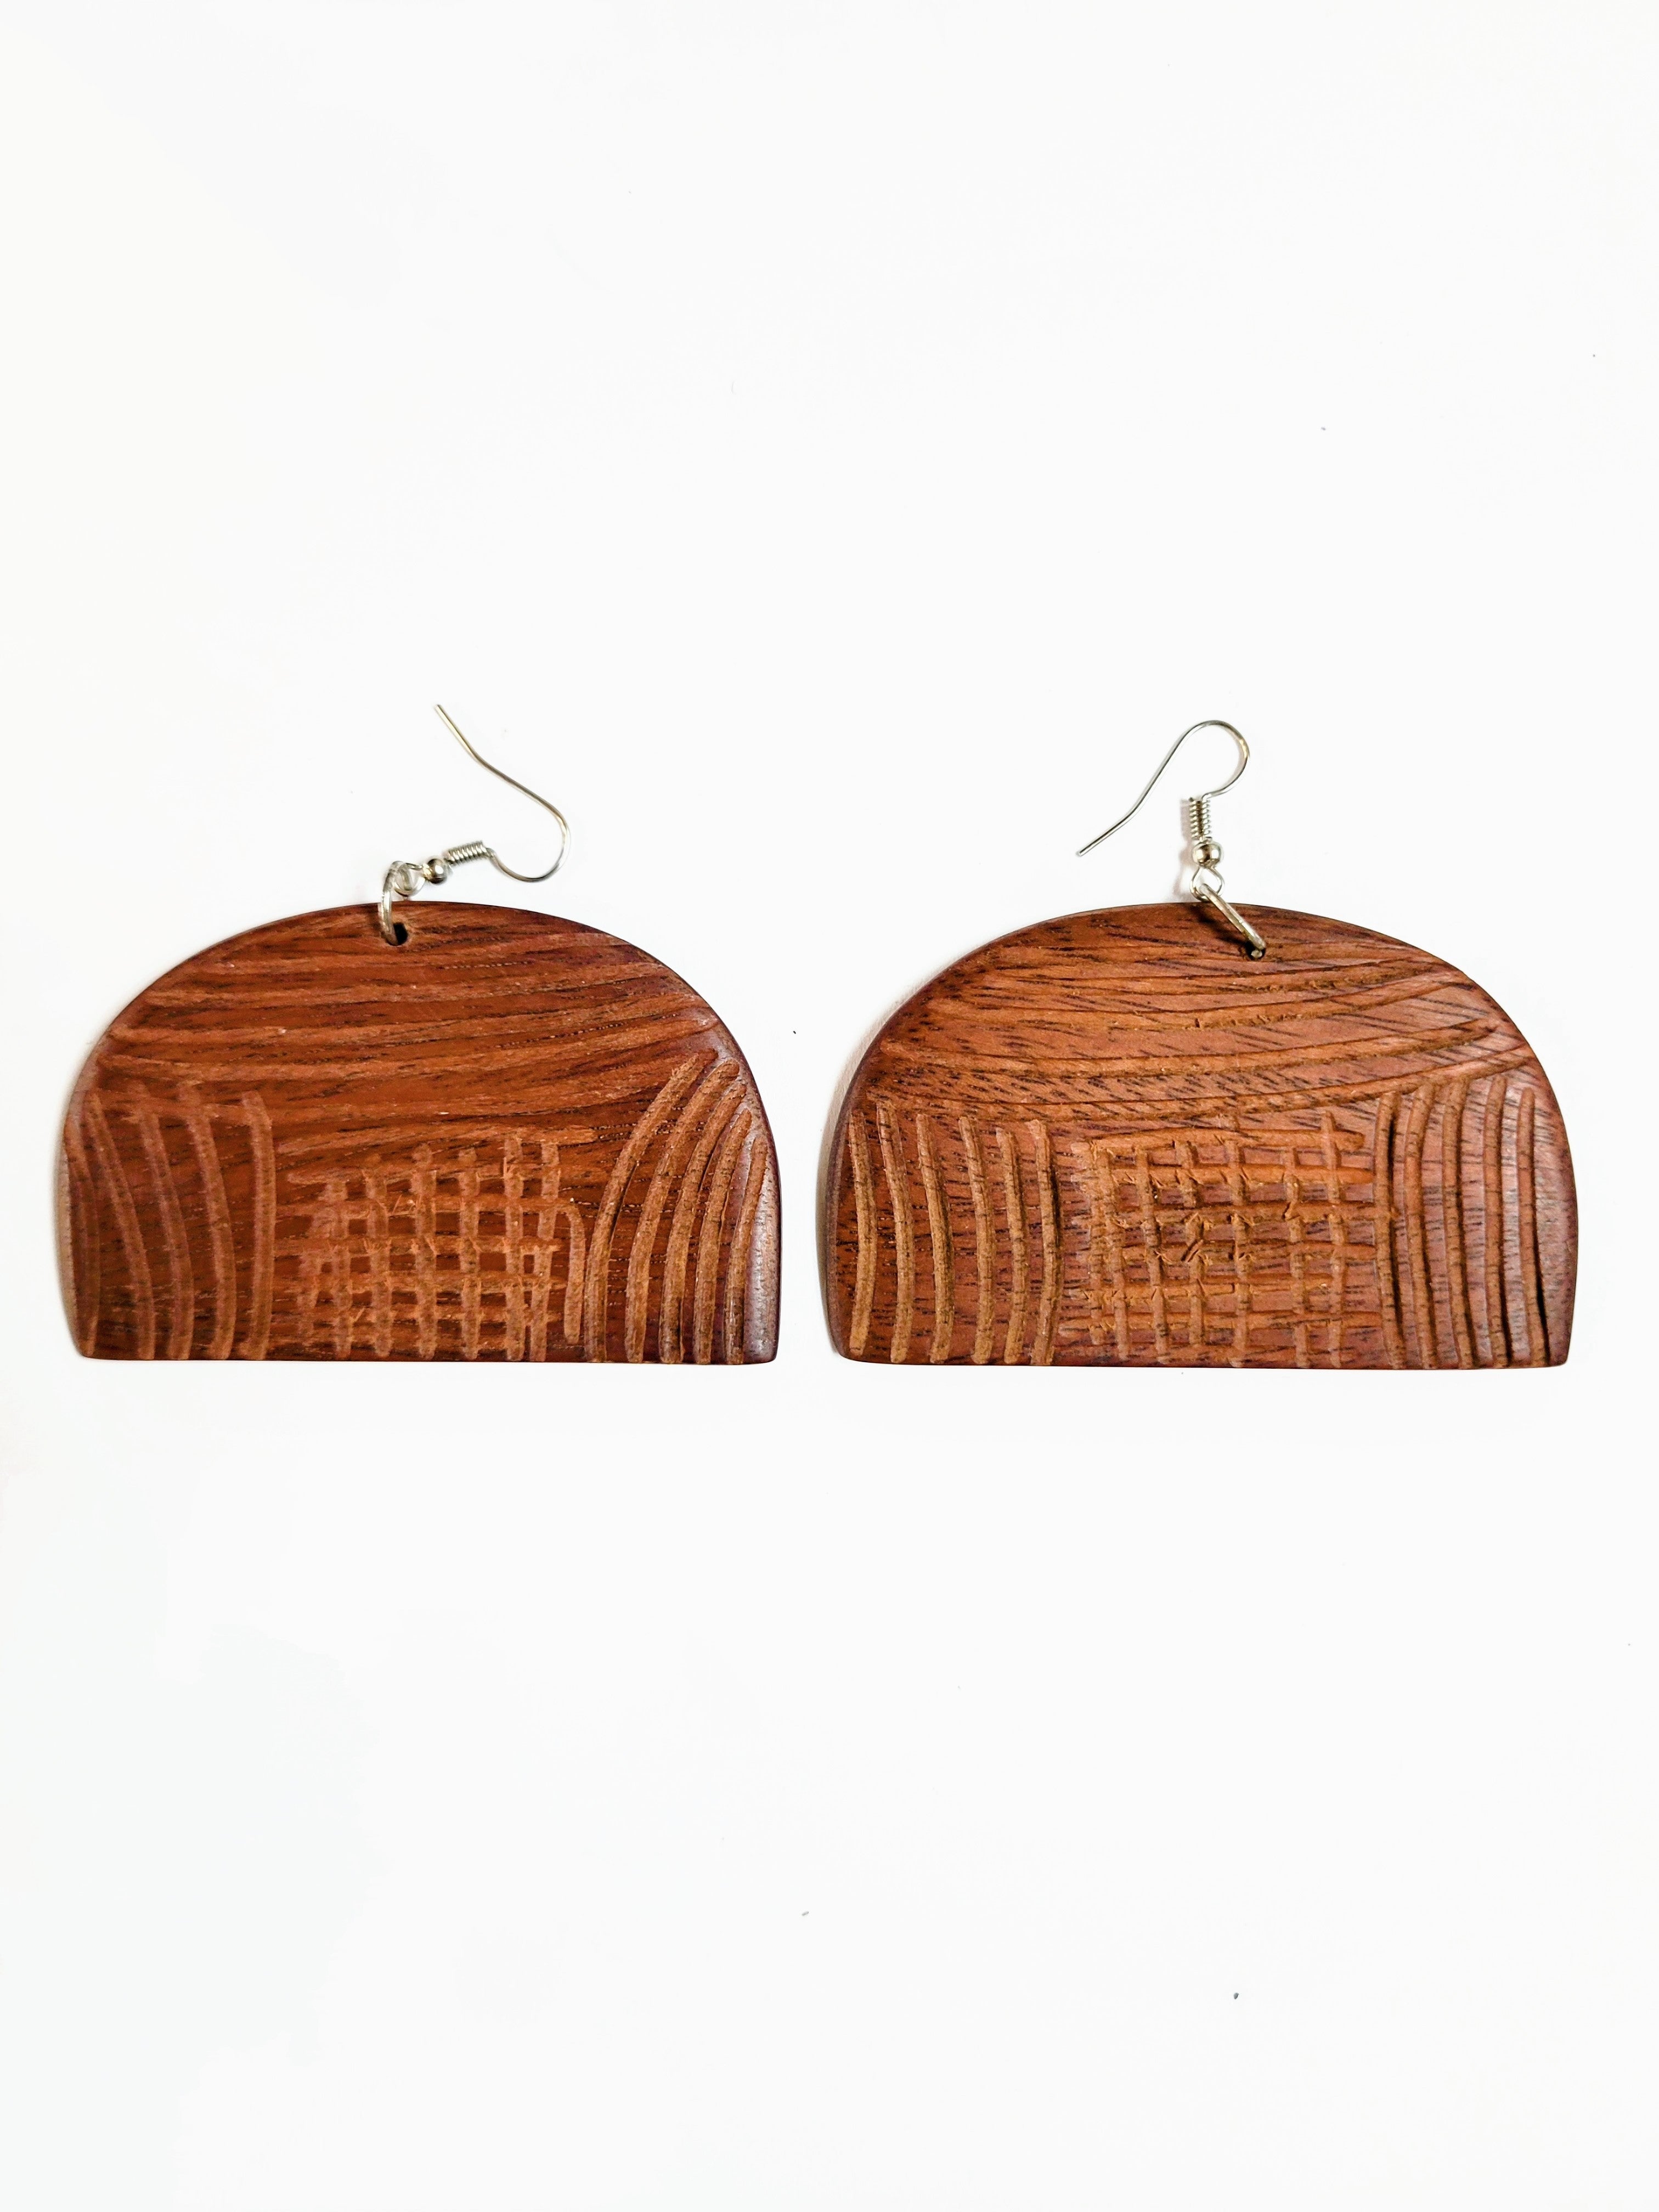 Thema crafted pair of handmade African Wooden Earrings-DPJGHE34